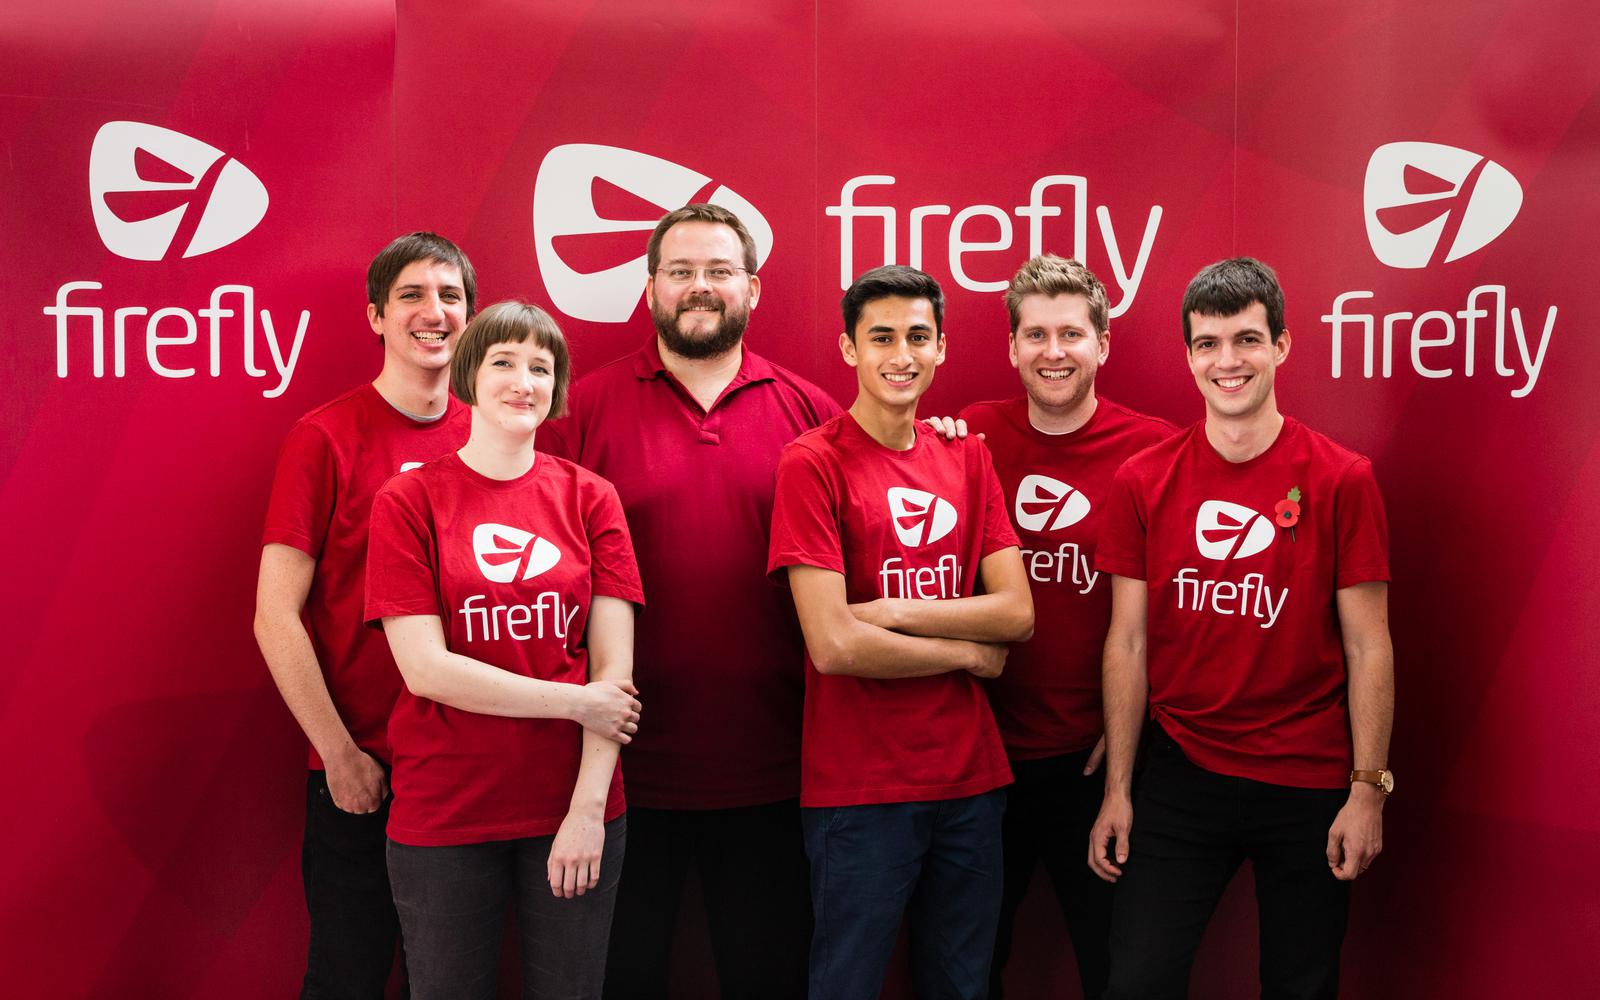 7 of us pose in red Firefly branded t-shirts.